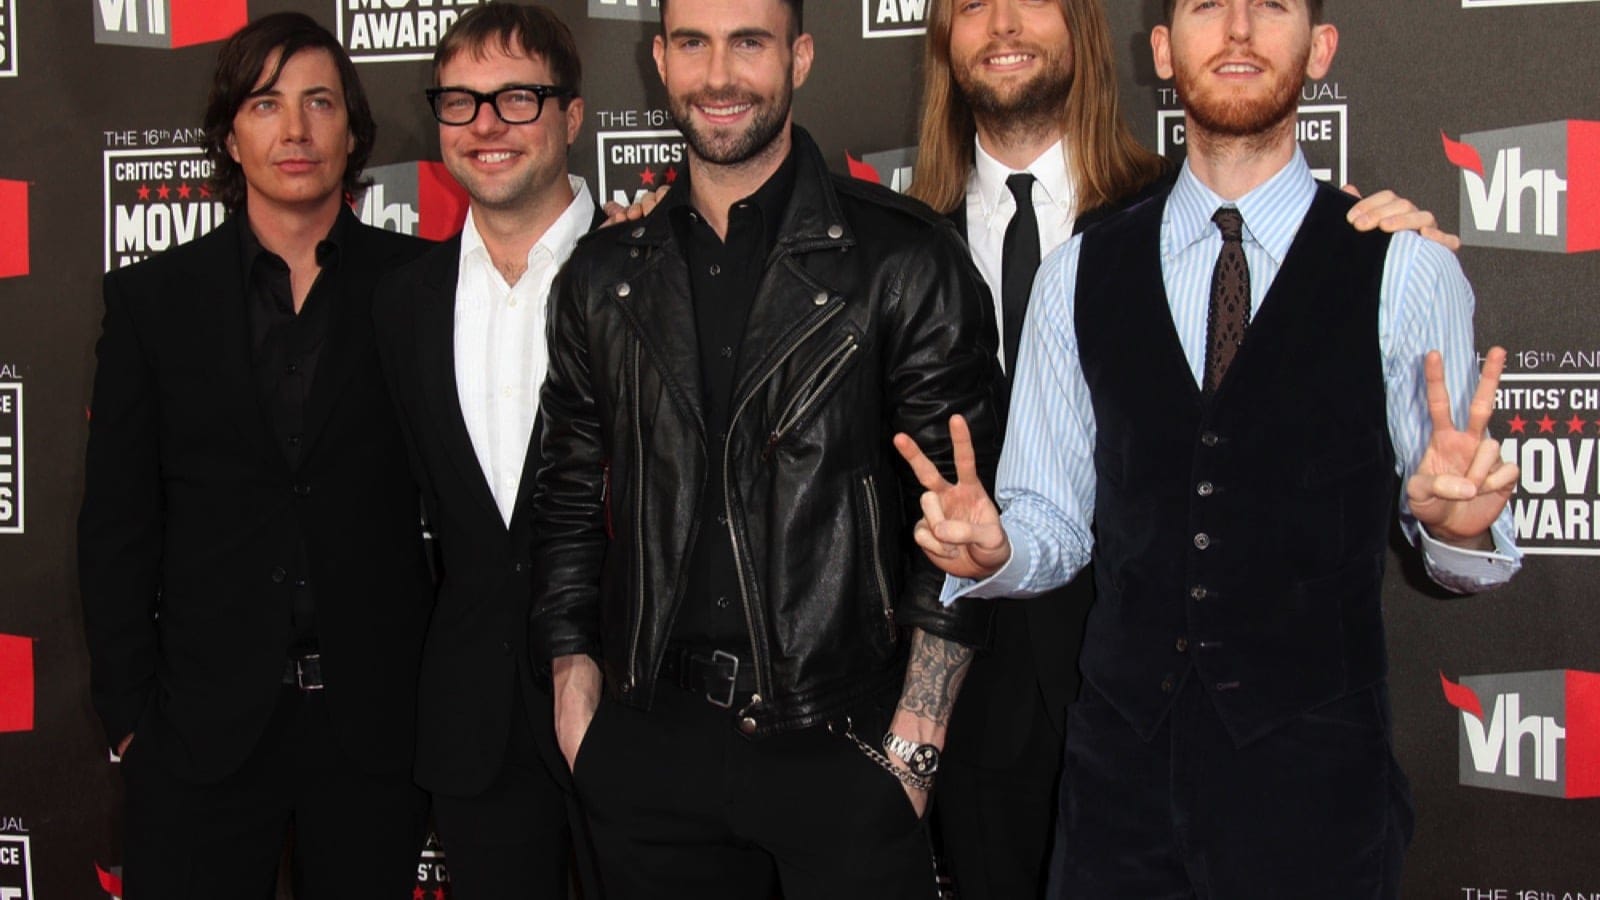 LOS ANGELES - JAN 14: Maroon 5 arrives at the 16th Annual "Critics" Choice Movie Awards on January 14, 2011 in Los Angeles, CA